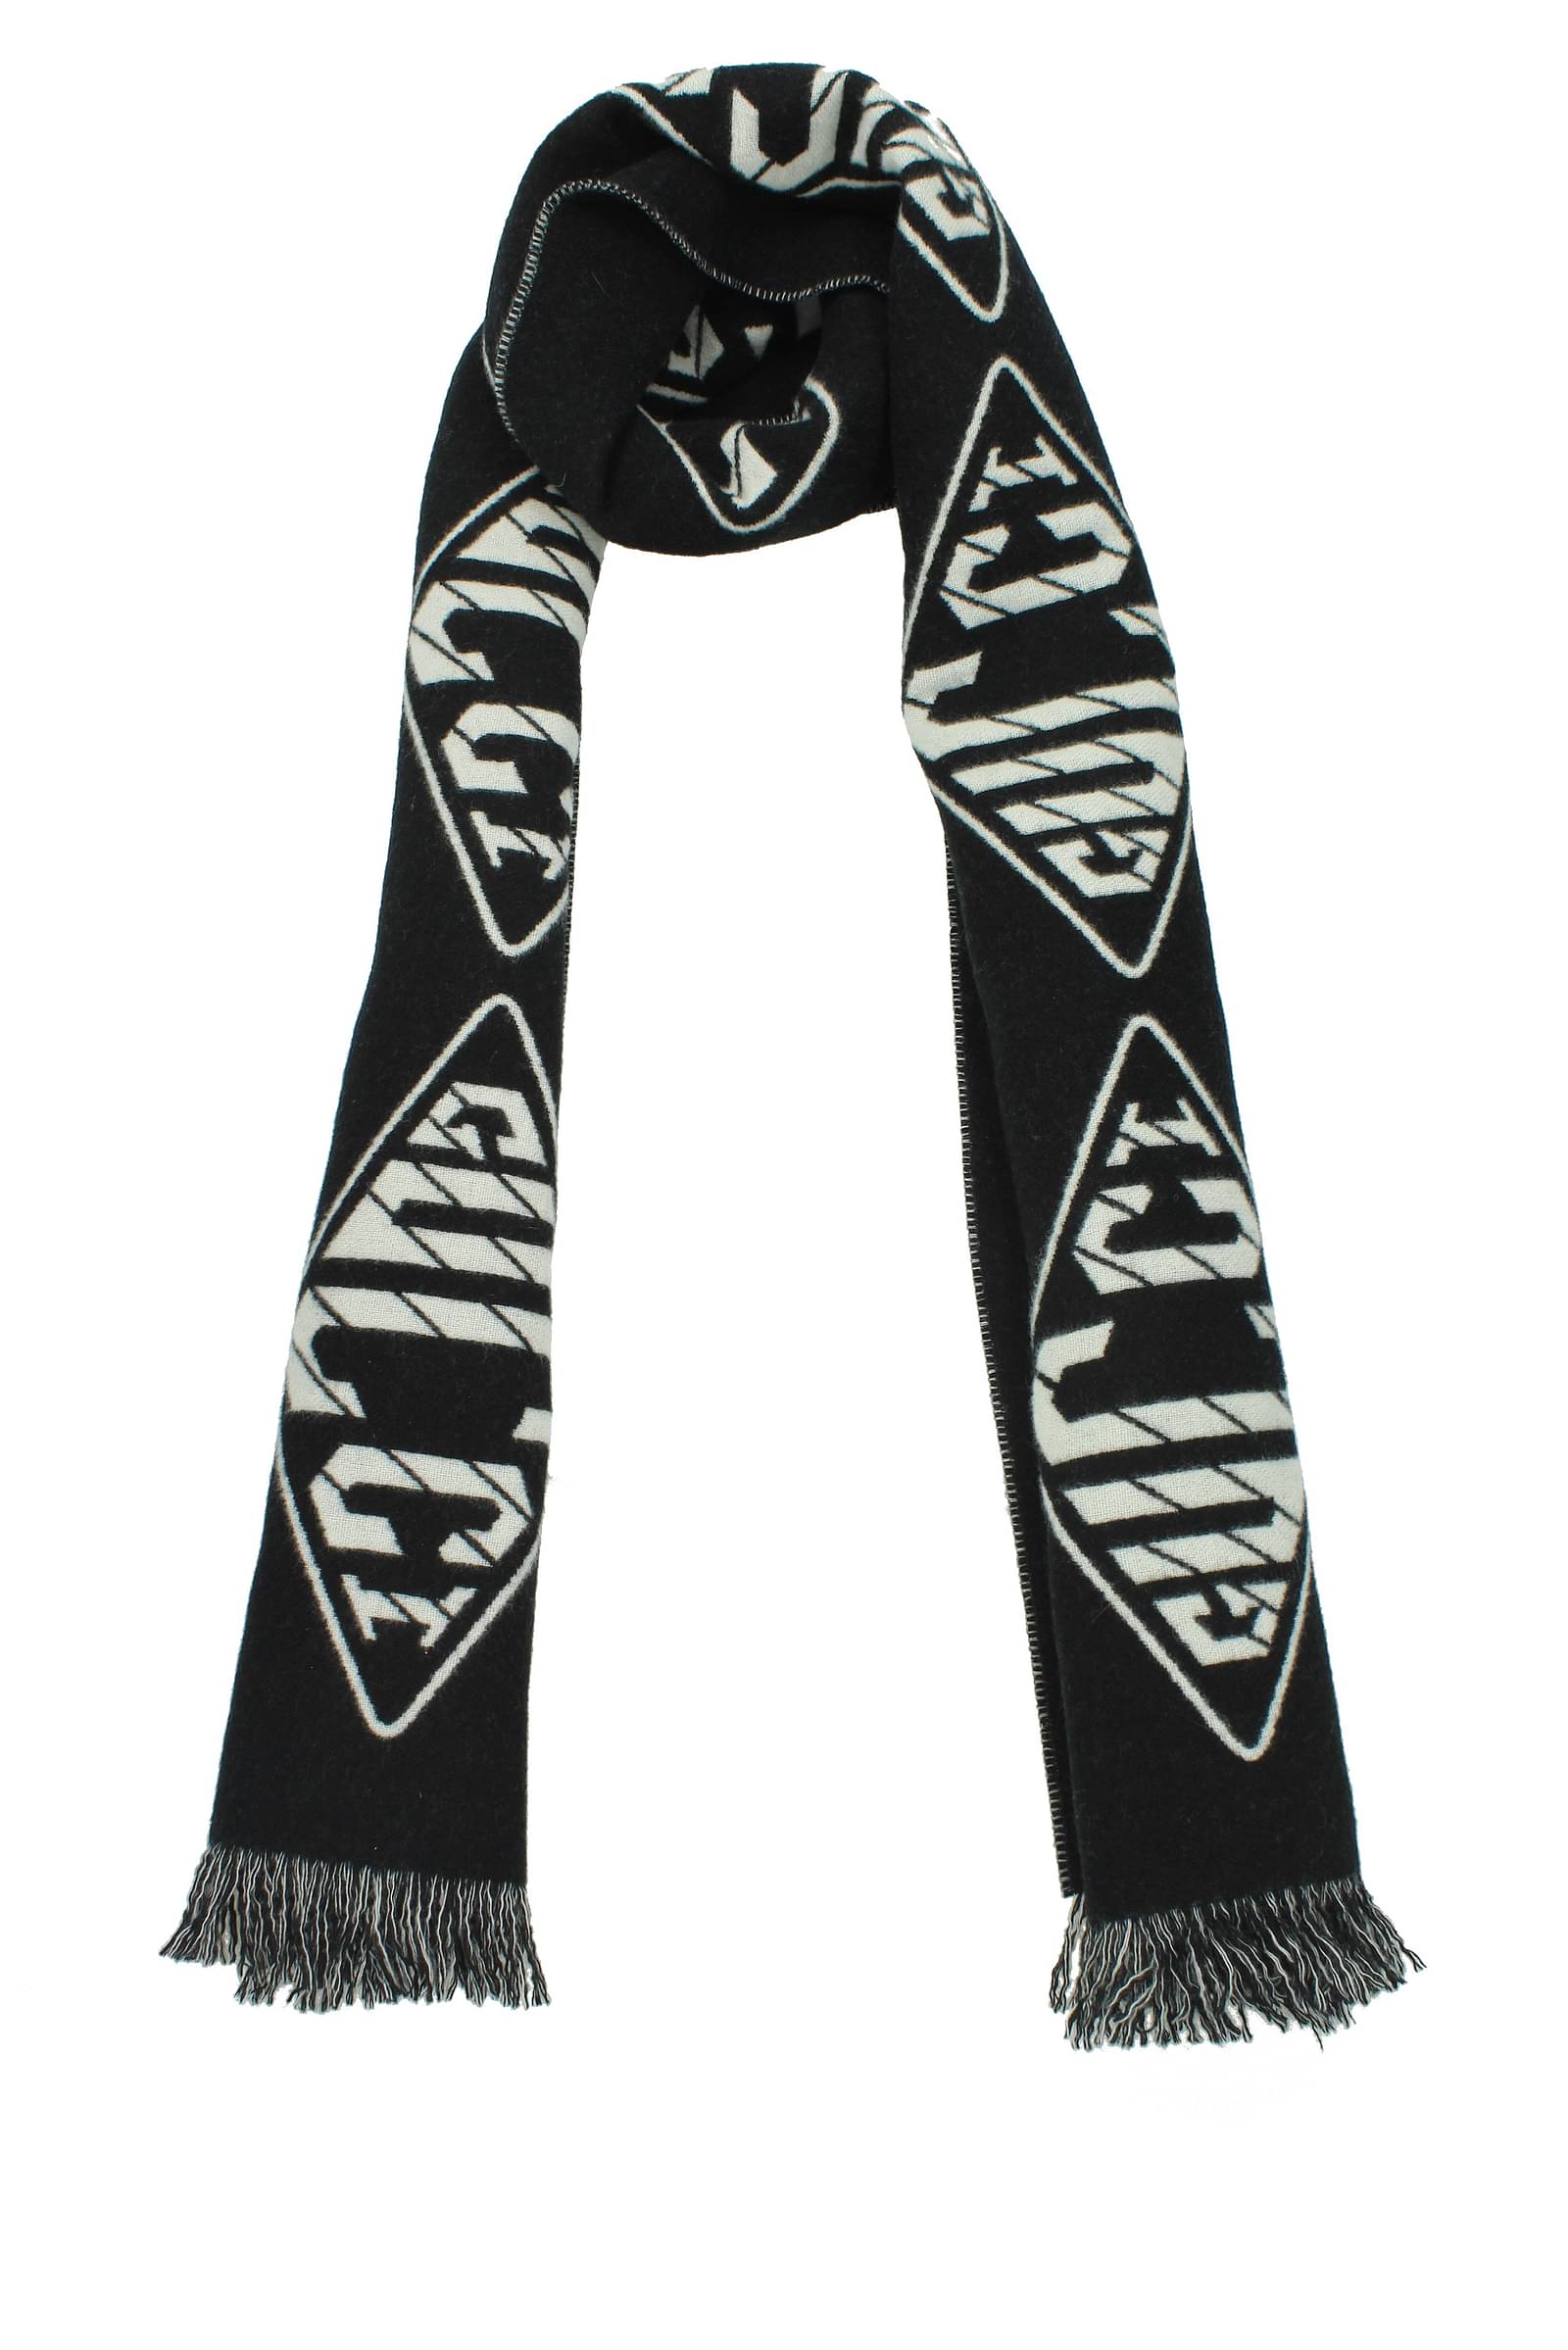 gucci scarf outlet online